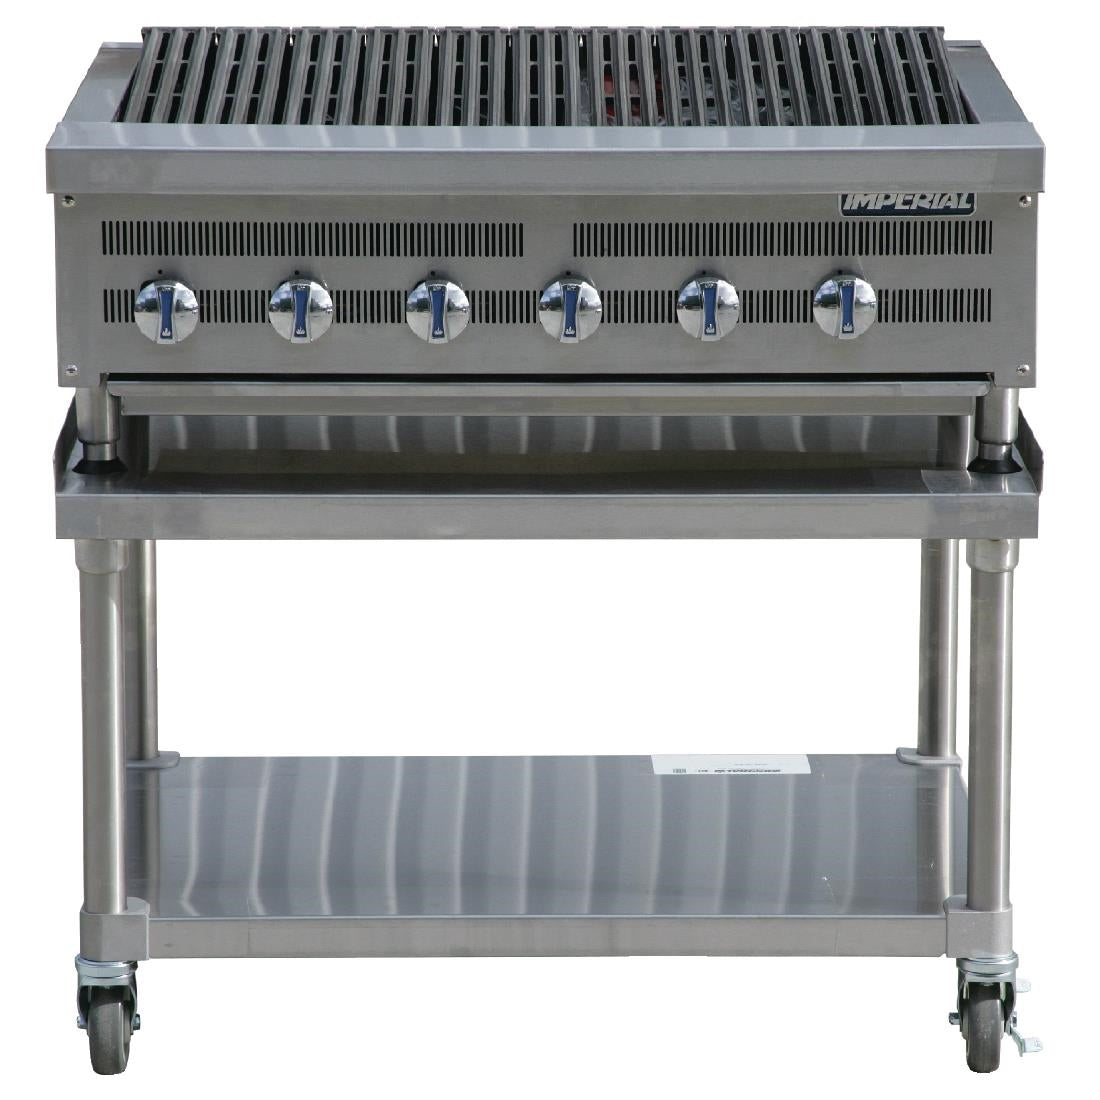 Imperial Radiant Chargrill IRBS-36 JD Catering Equipment Solutions Ltd